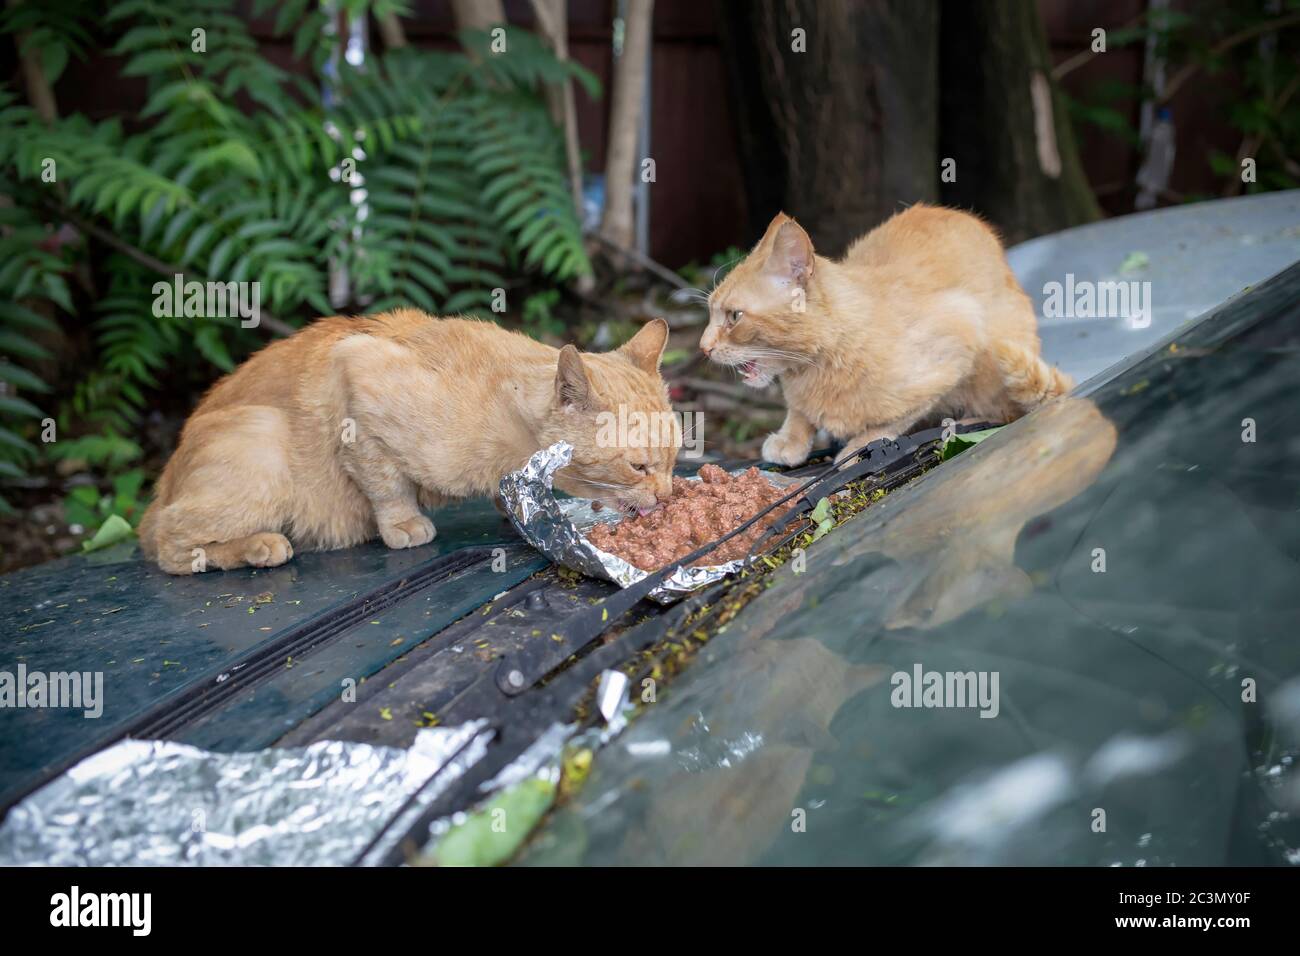 Ginger cats having meal on a car hood Stock Photo